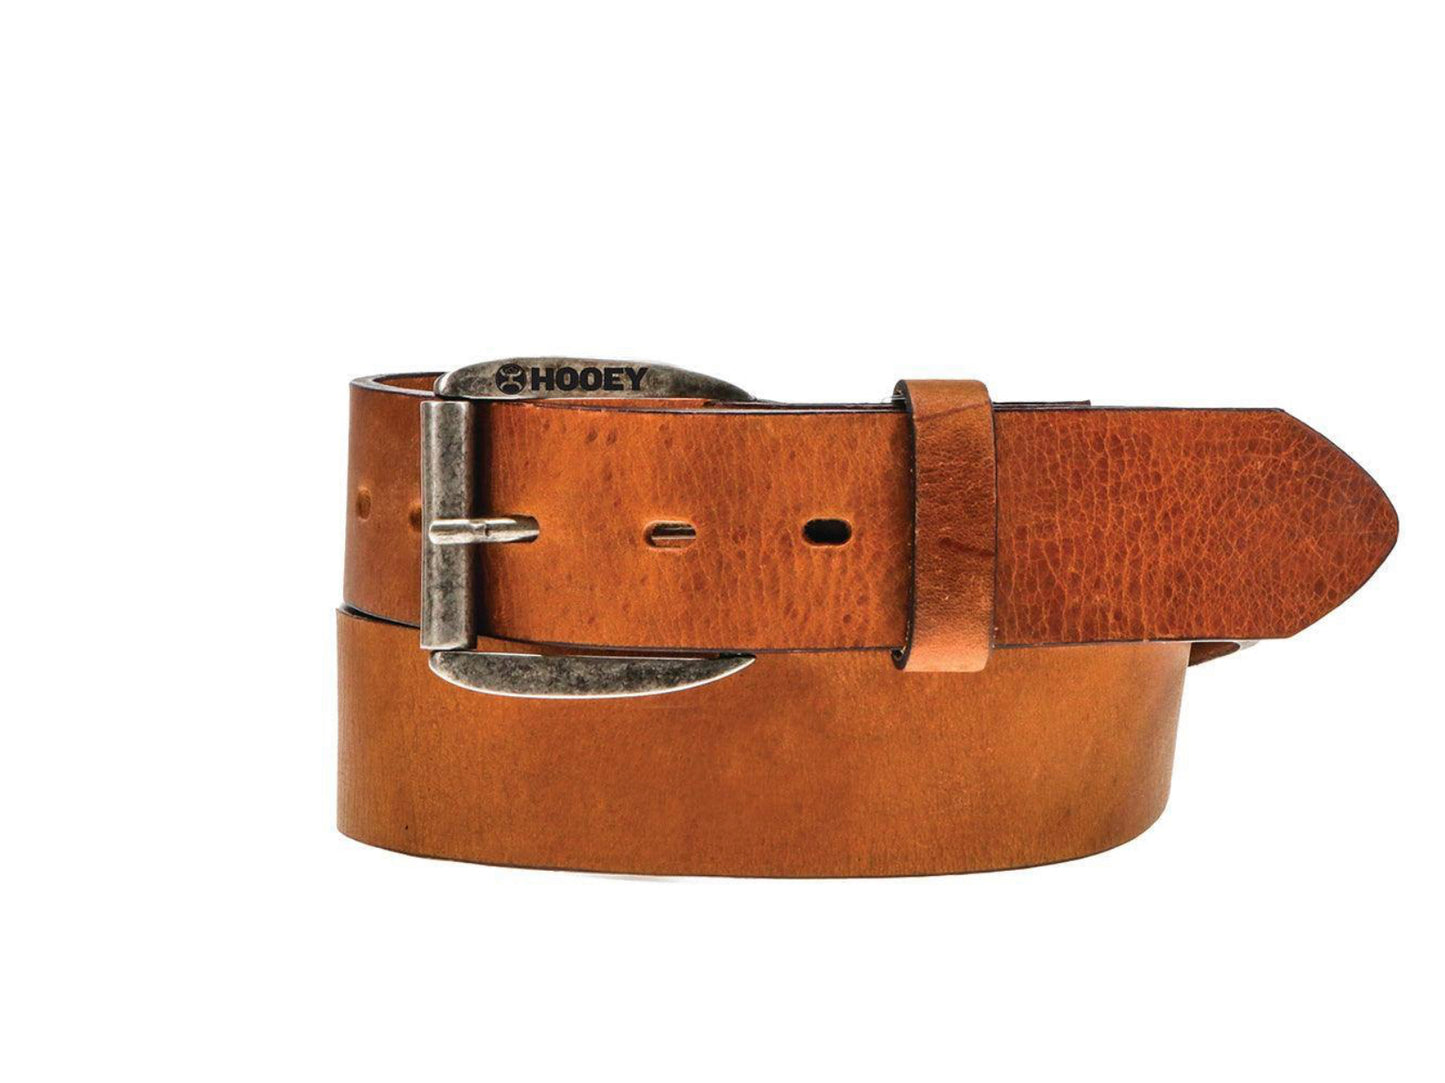 HOOEY “CLASSIC HOOEY BOMBER” 1.5” MADE IN THE USA TAN BOMBER BELT